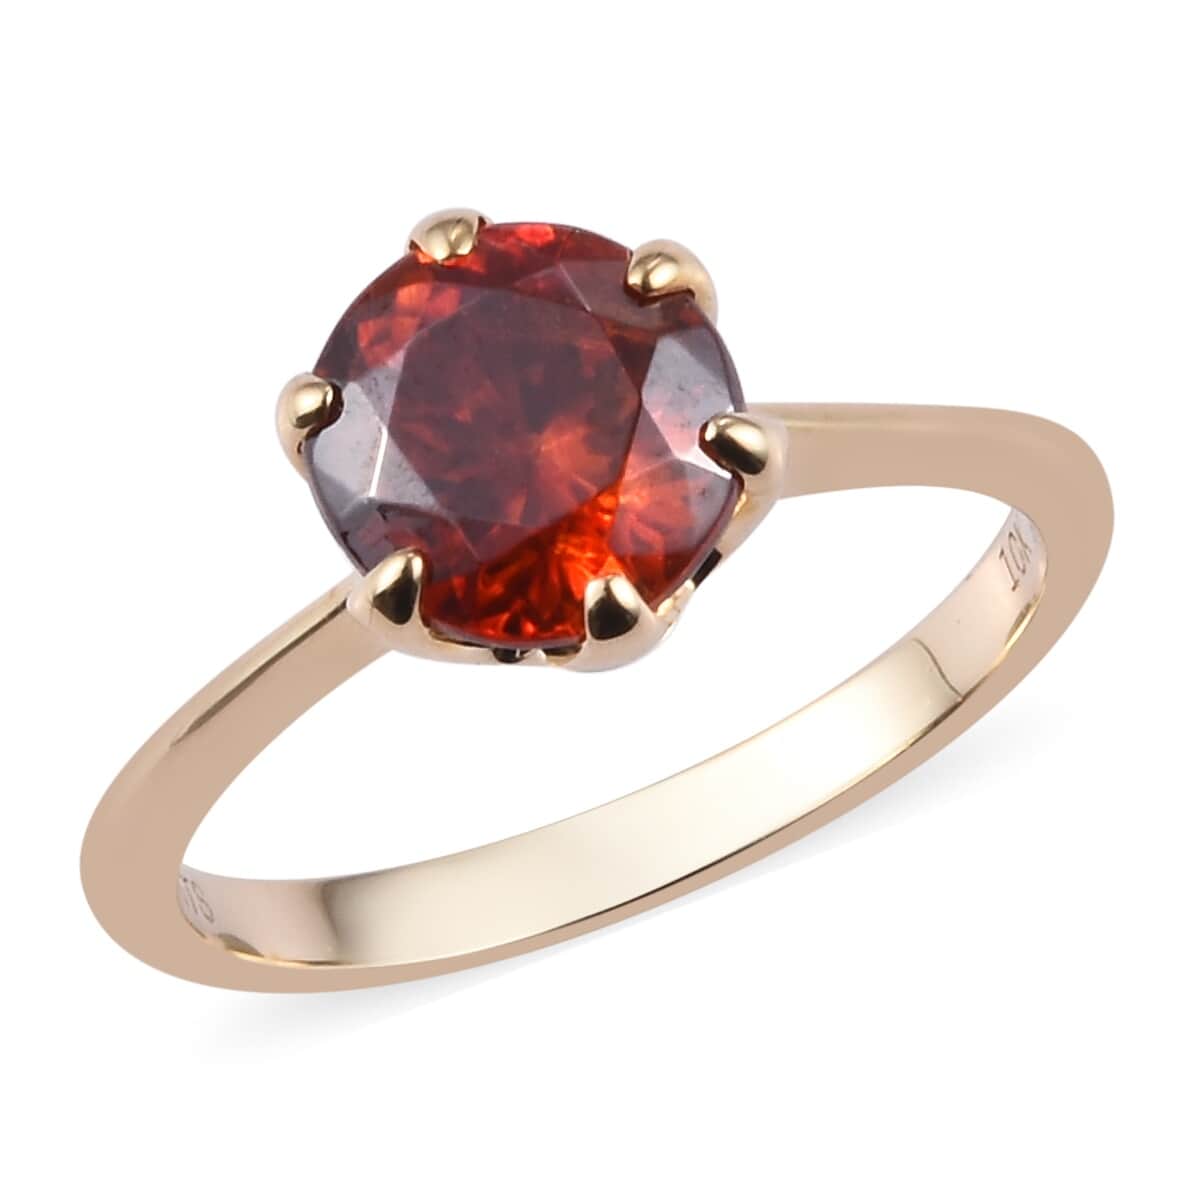 LUXORO 10K Yellow Gold Natural Picos Altos Red Sphalerite Solitaire Ring (Size 7.0) (2.35 g) 2.25 ctw image number 0